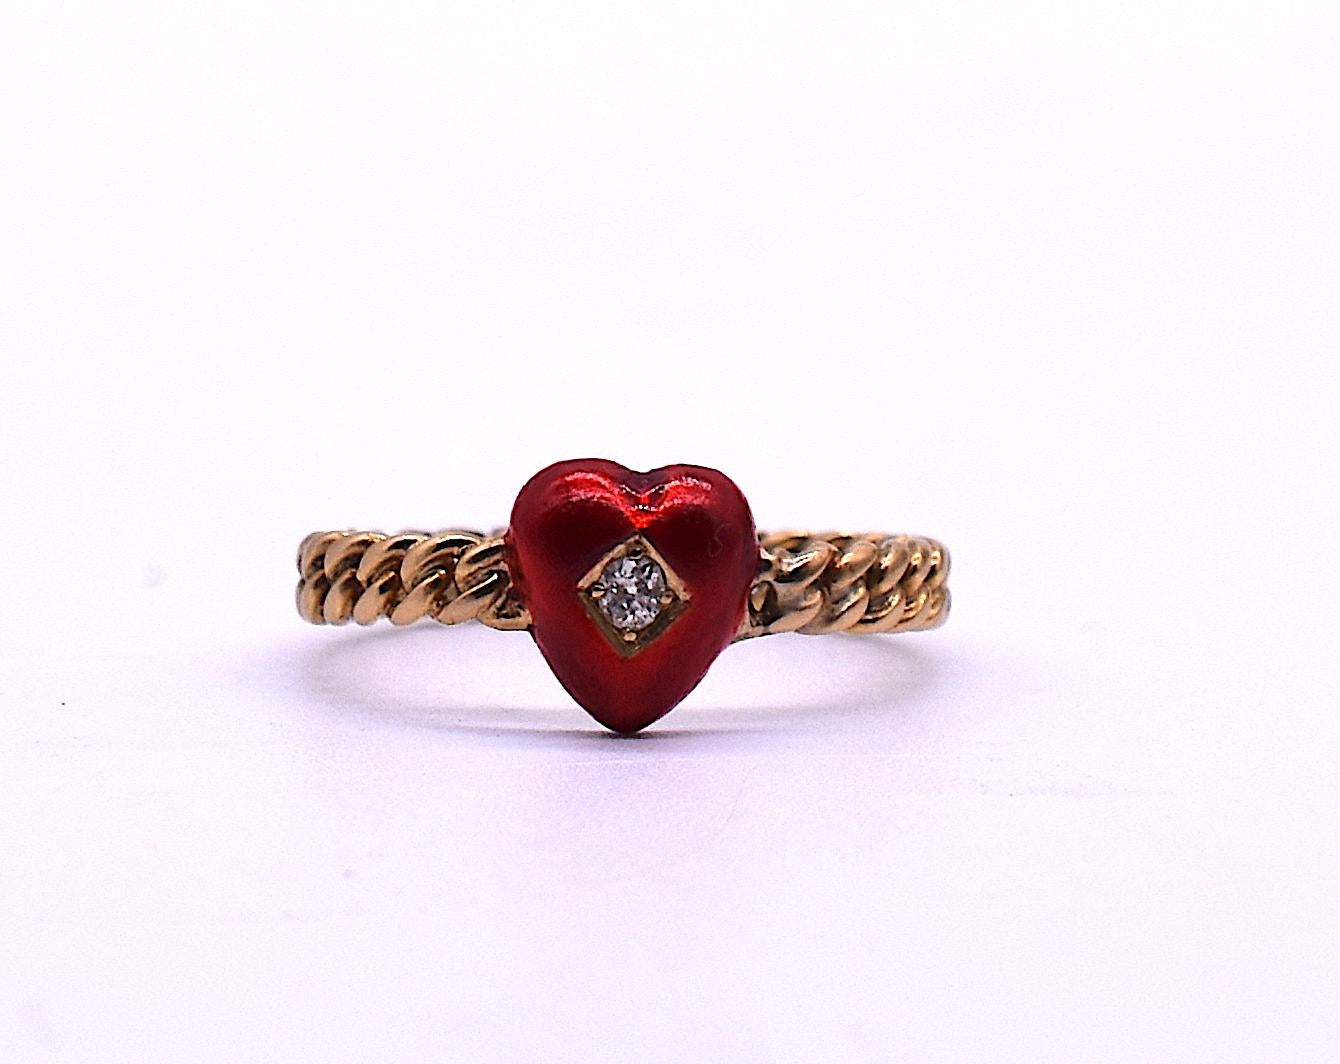 18K Edwardian gold band ring featuring a lovely enamel red heart with a round diamond embedded in a diamond shape at the center. The ring is enhanced by its the twisted rope band. We love the burst of color the little red heart adds as well as the